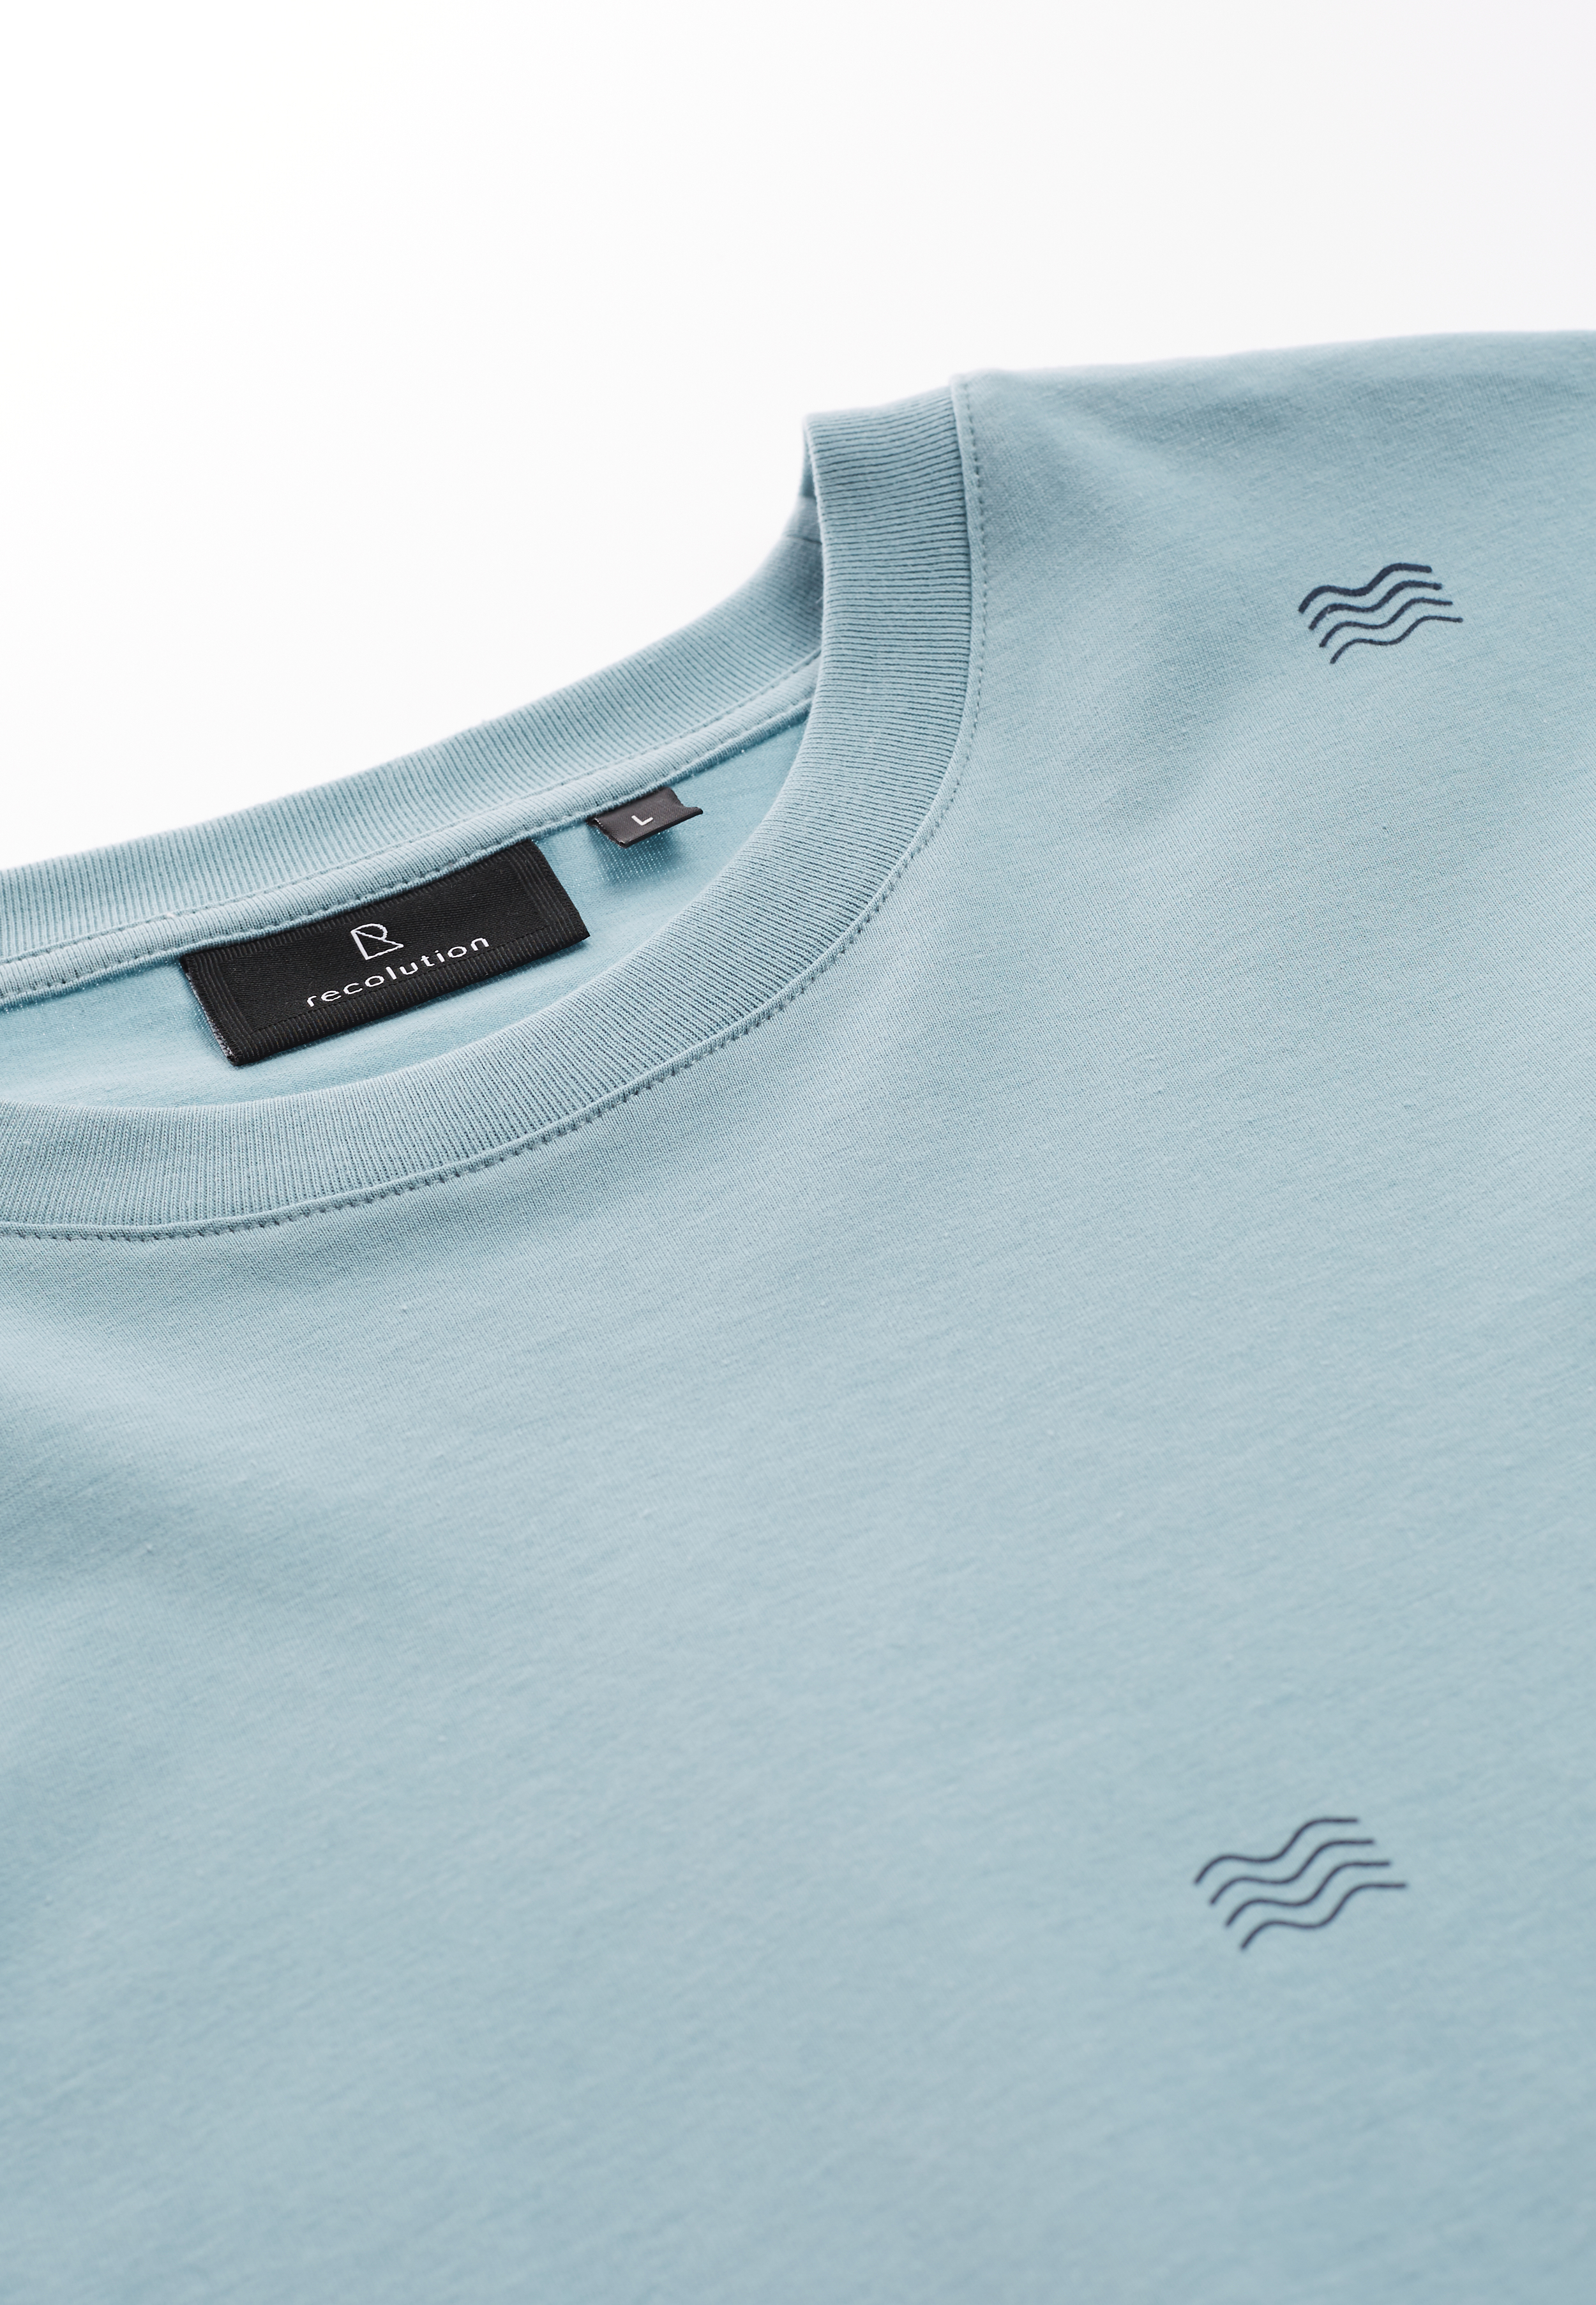 T-Shirt AGAVE WAVE mineral blue